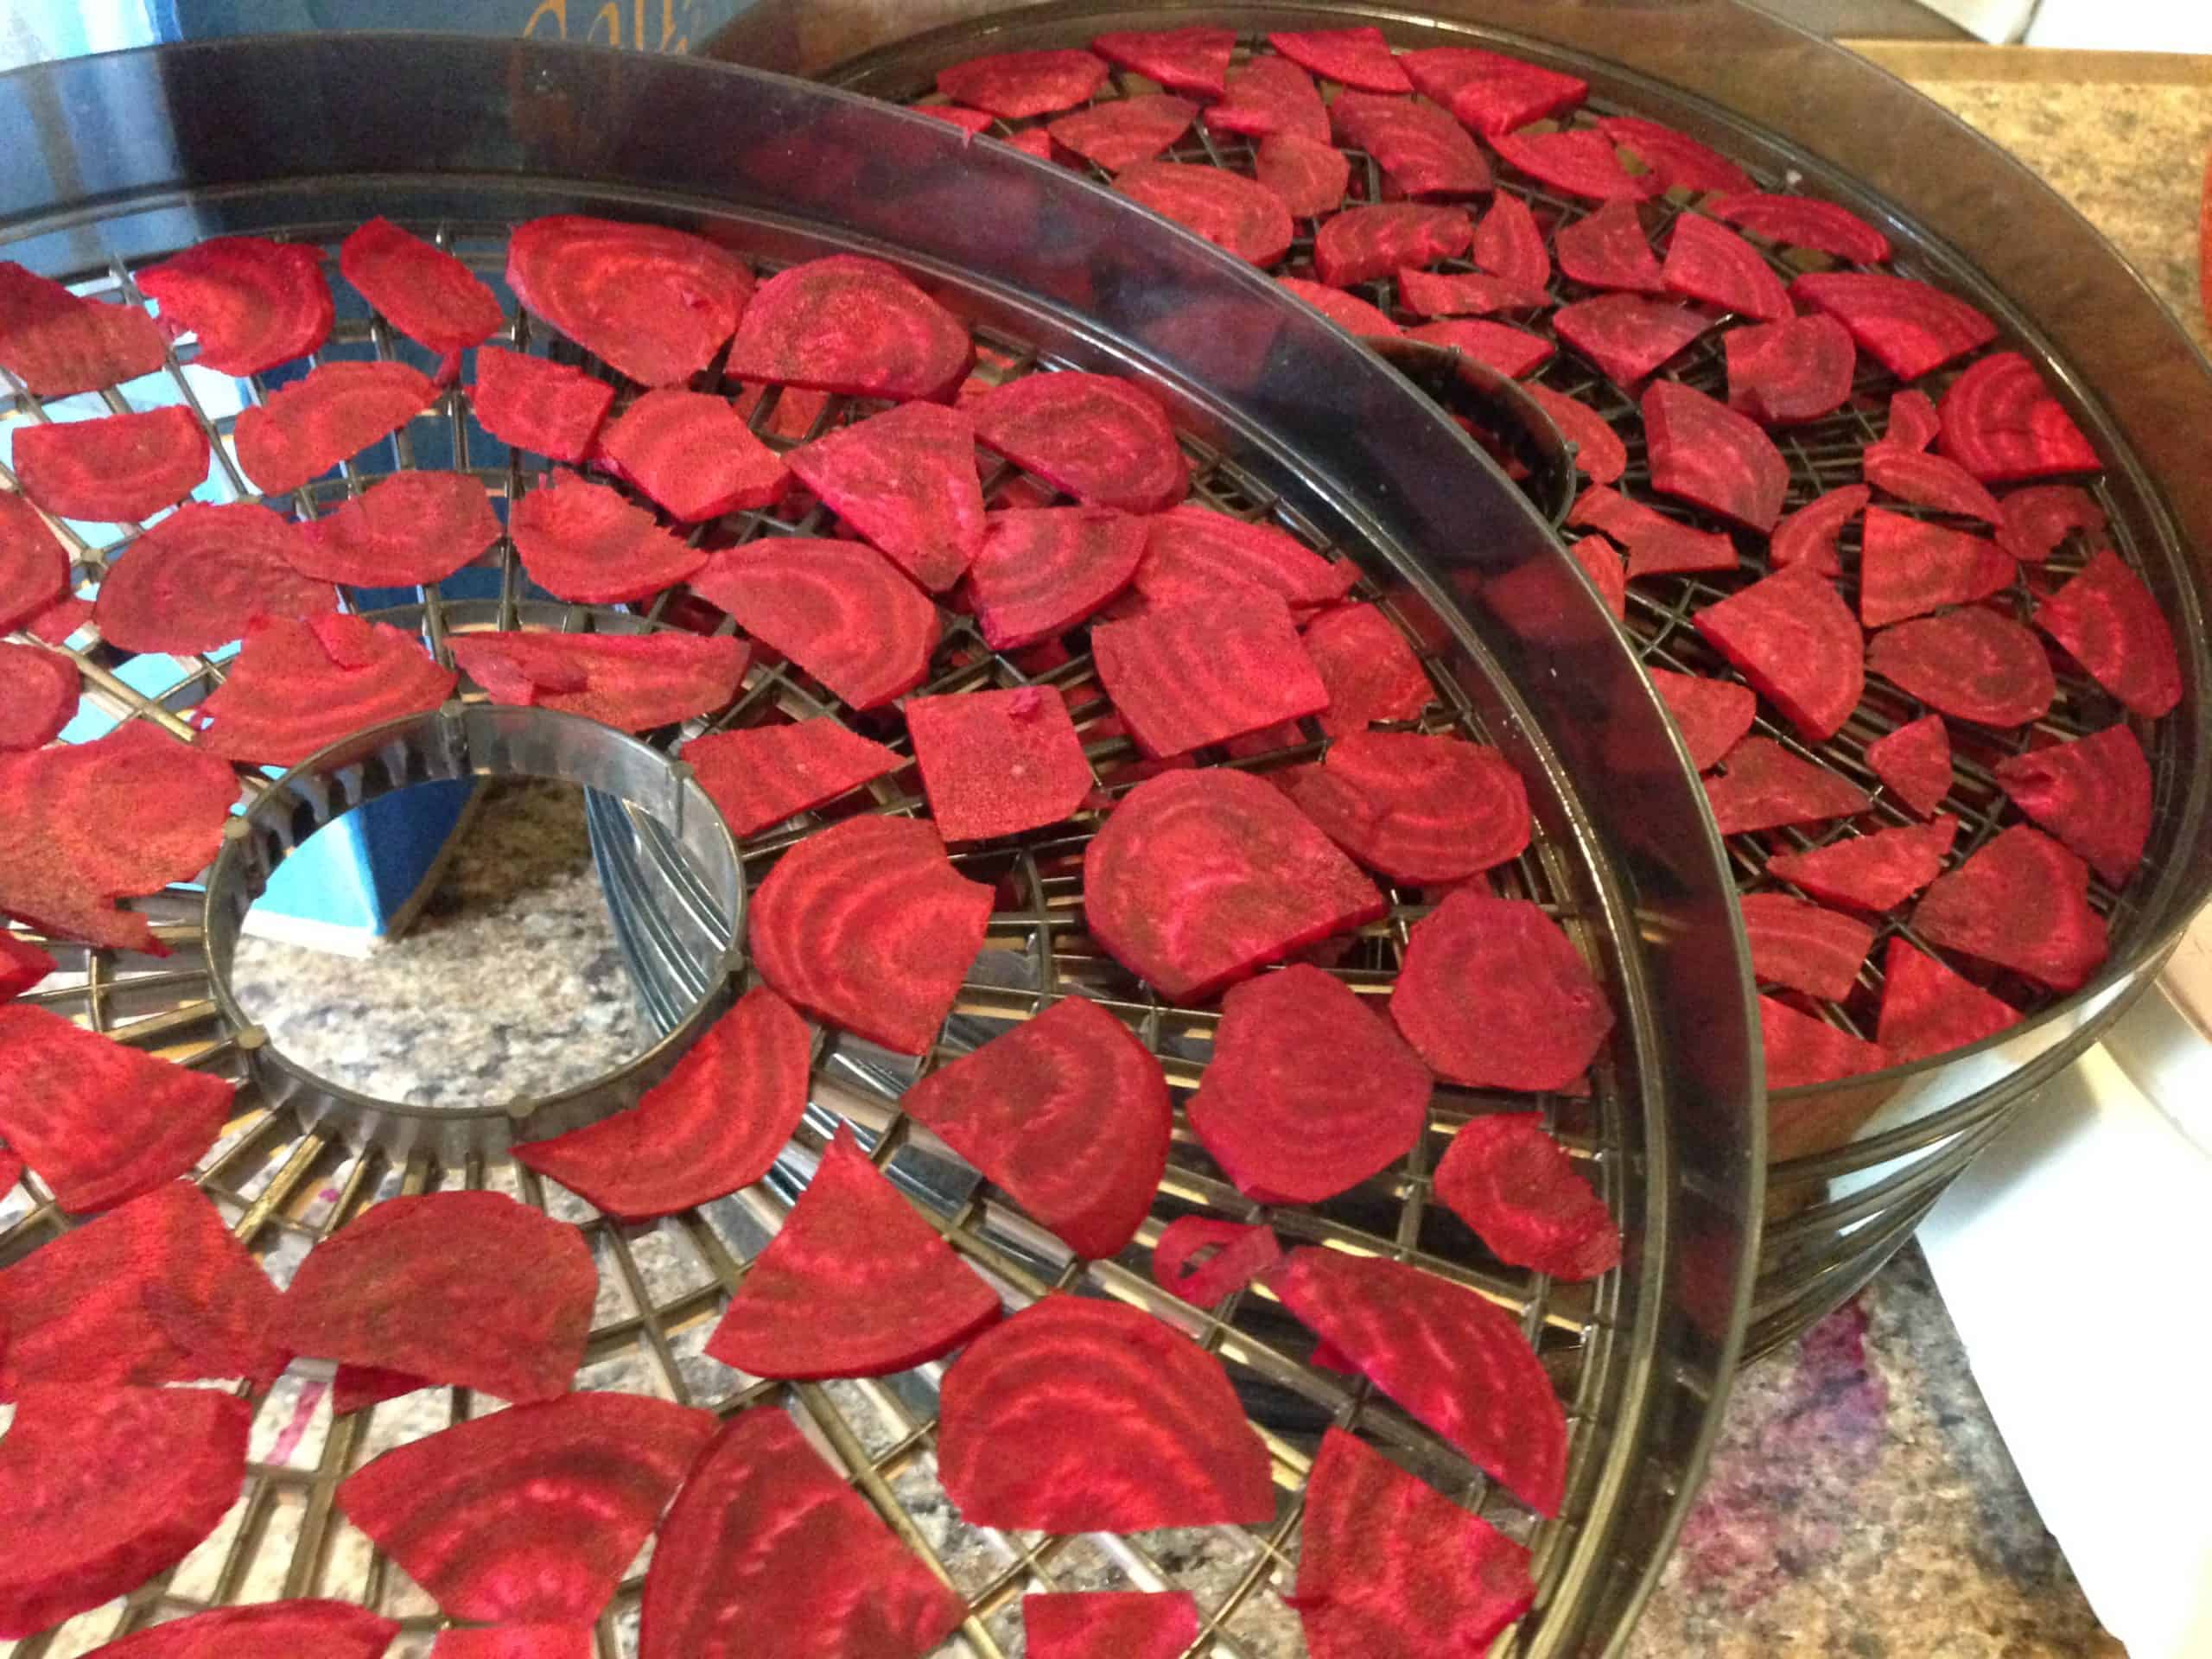 Sliced beets going into the dehydrator